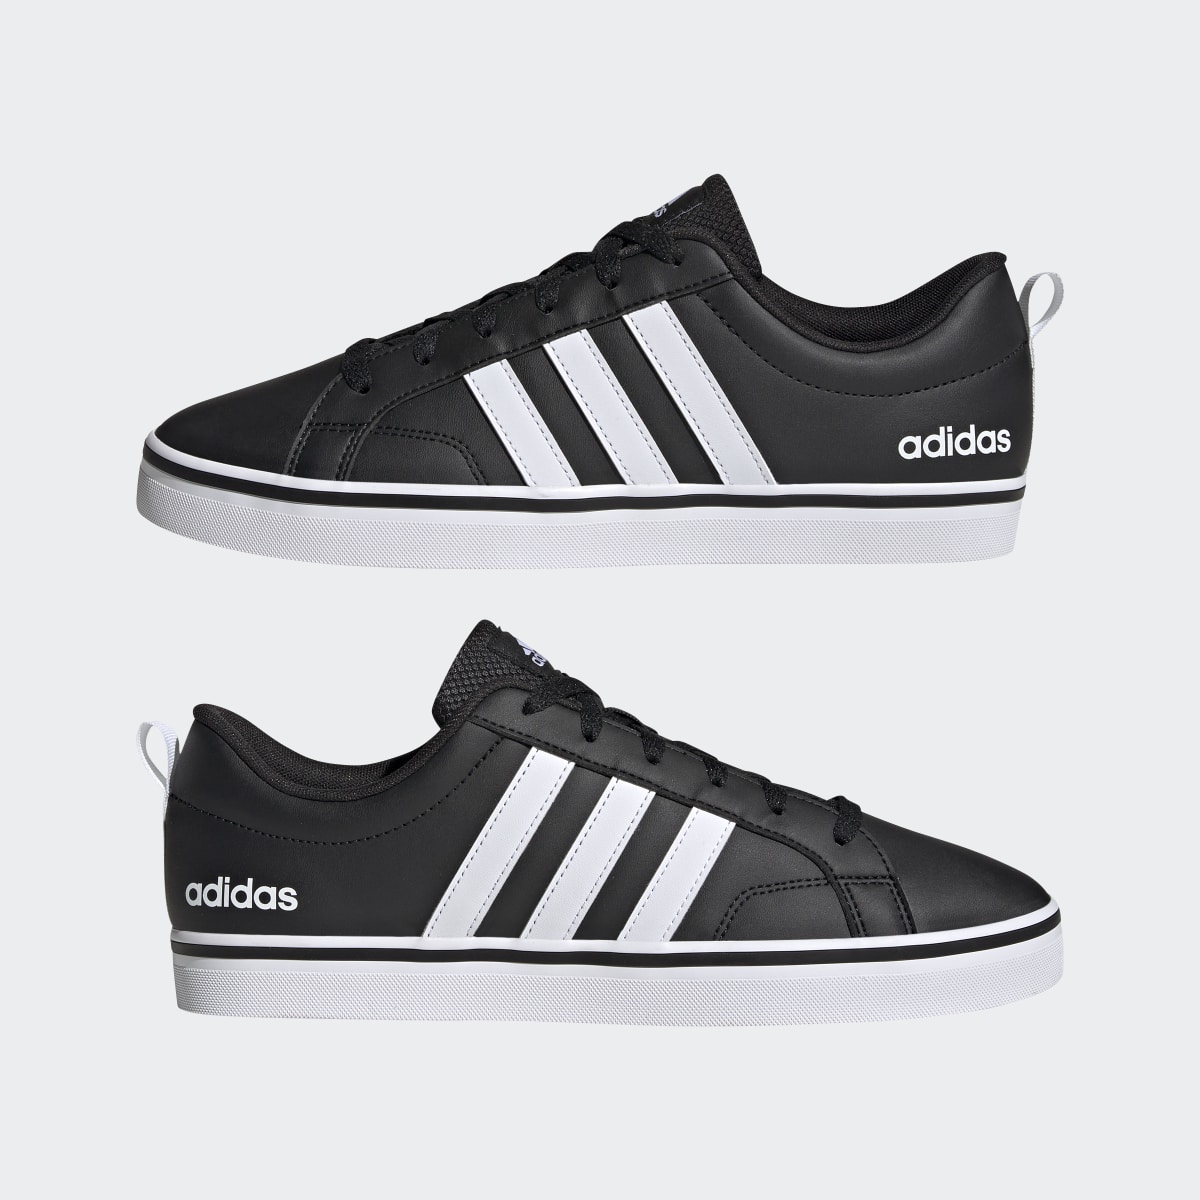 Adidas VS Pace 2.0 Shoes. 8